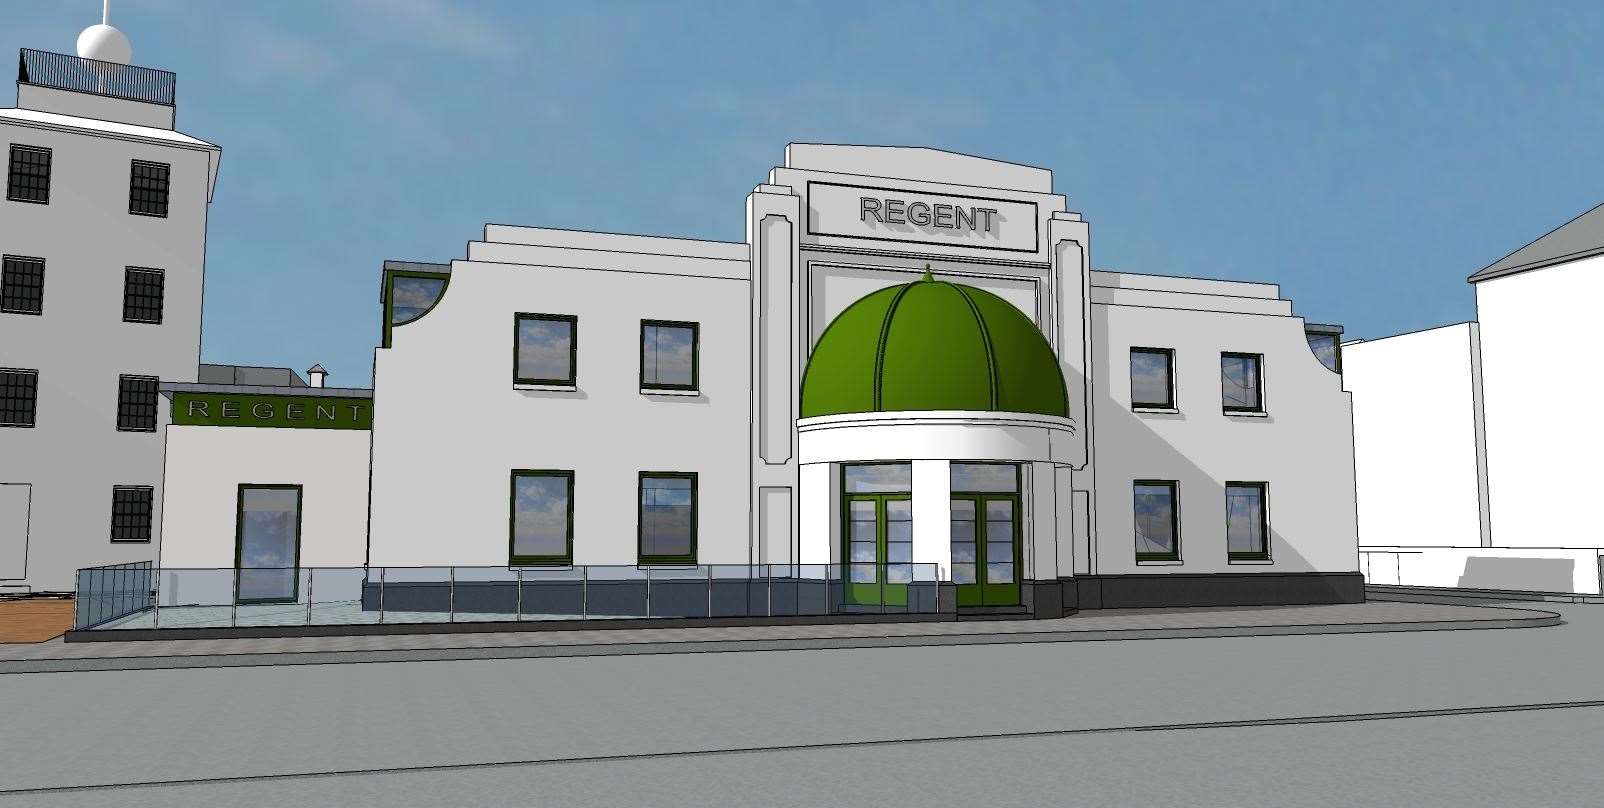 Plans for a cinema at The Regent have been approved after an eight year wait